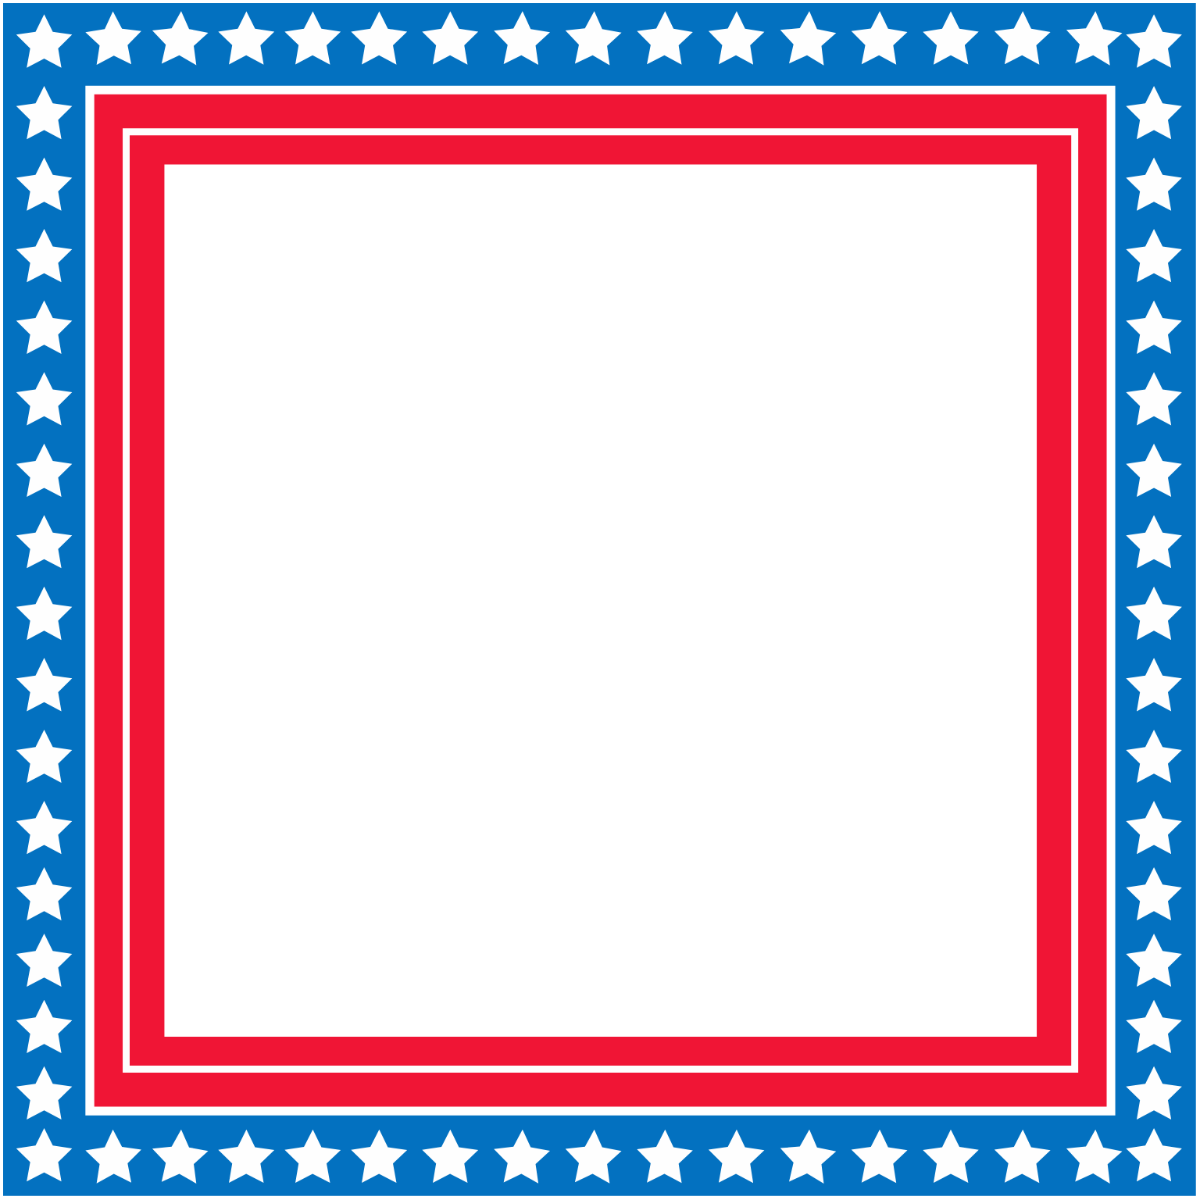 Constitution and Citizenship Day Border Clip Art Template